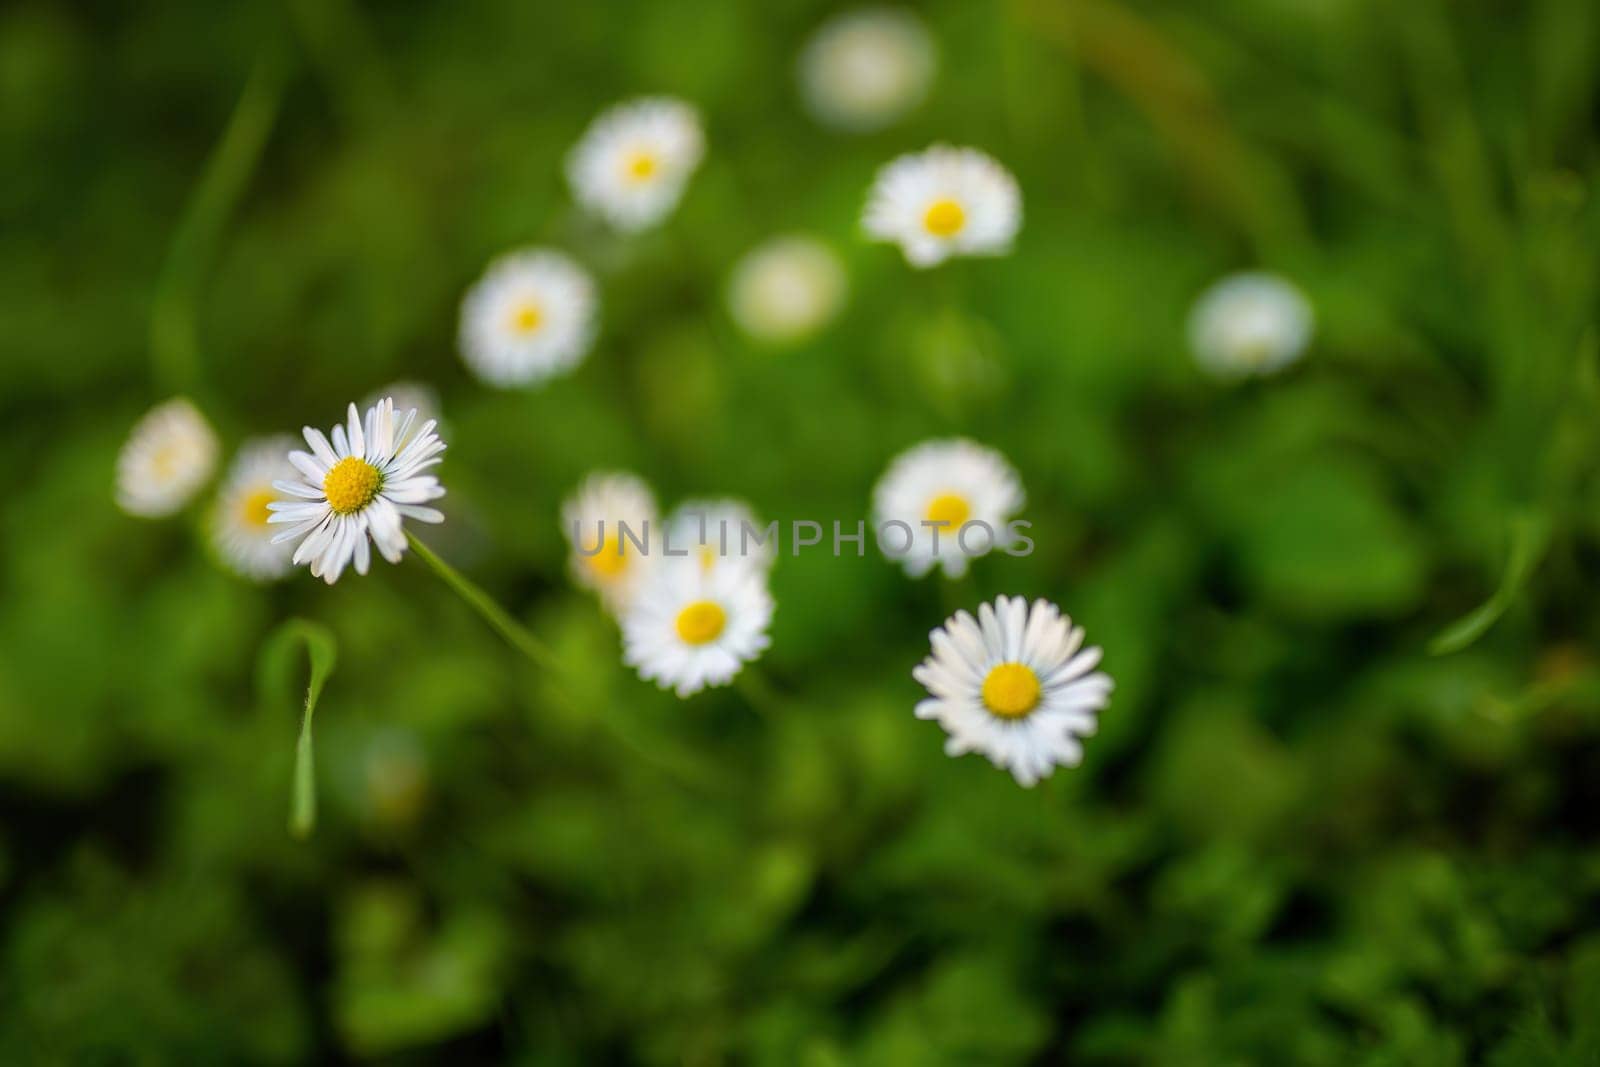 Numerous daisies bloom abundantly in a lush green grass field.